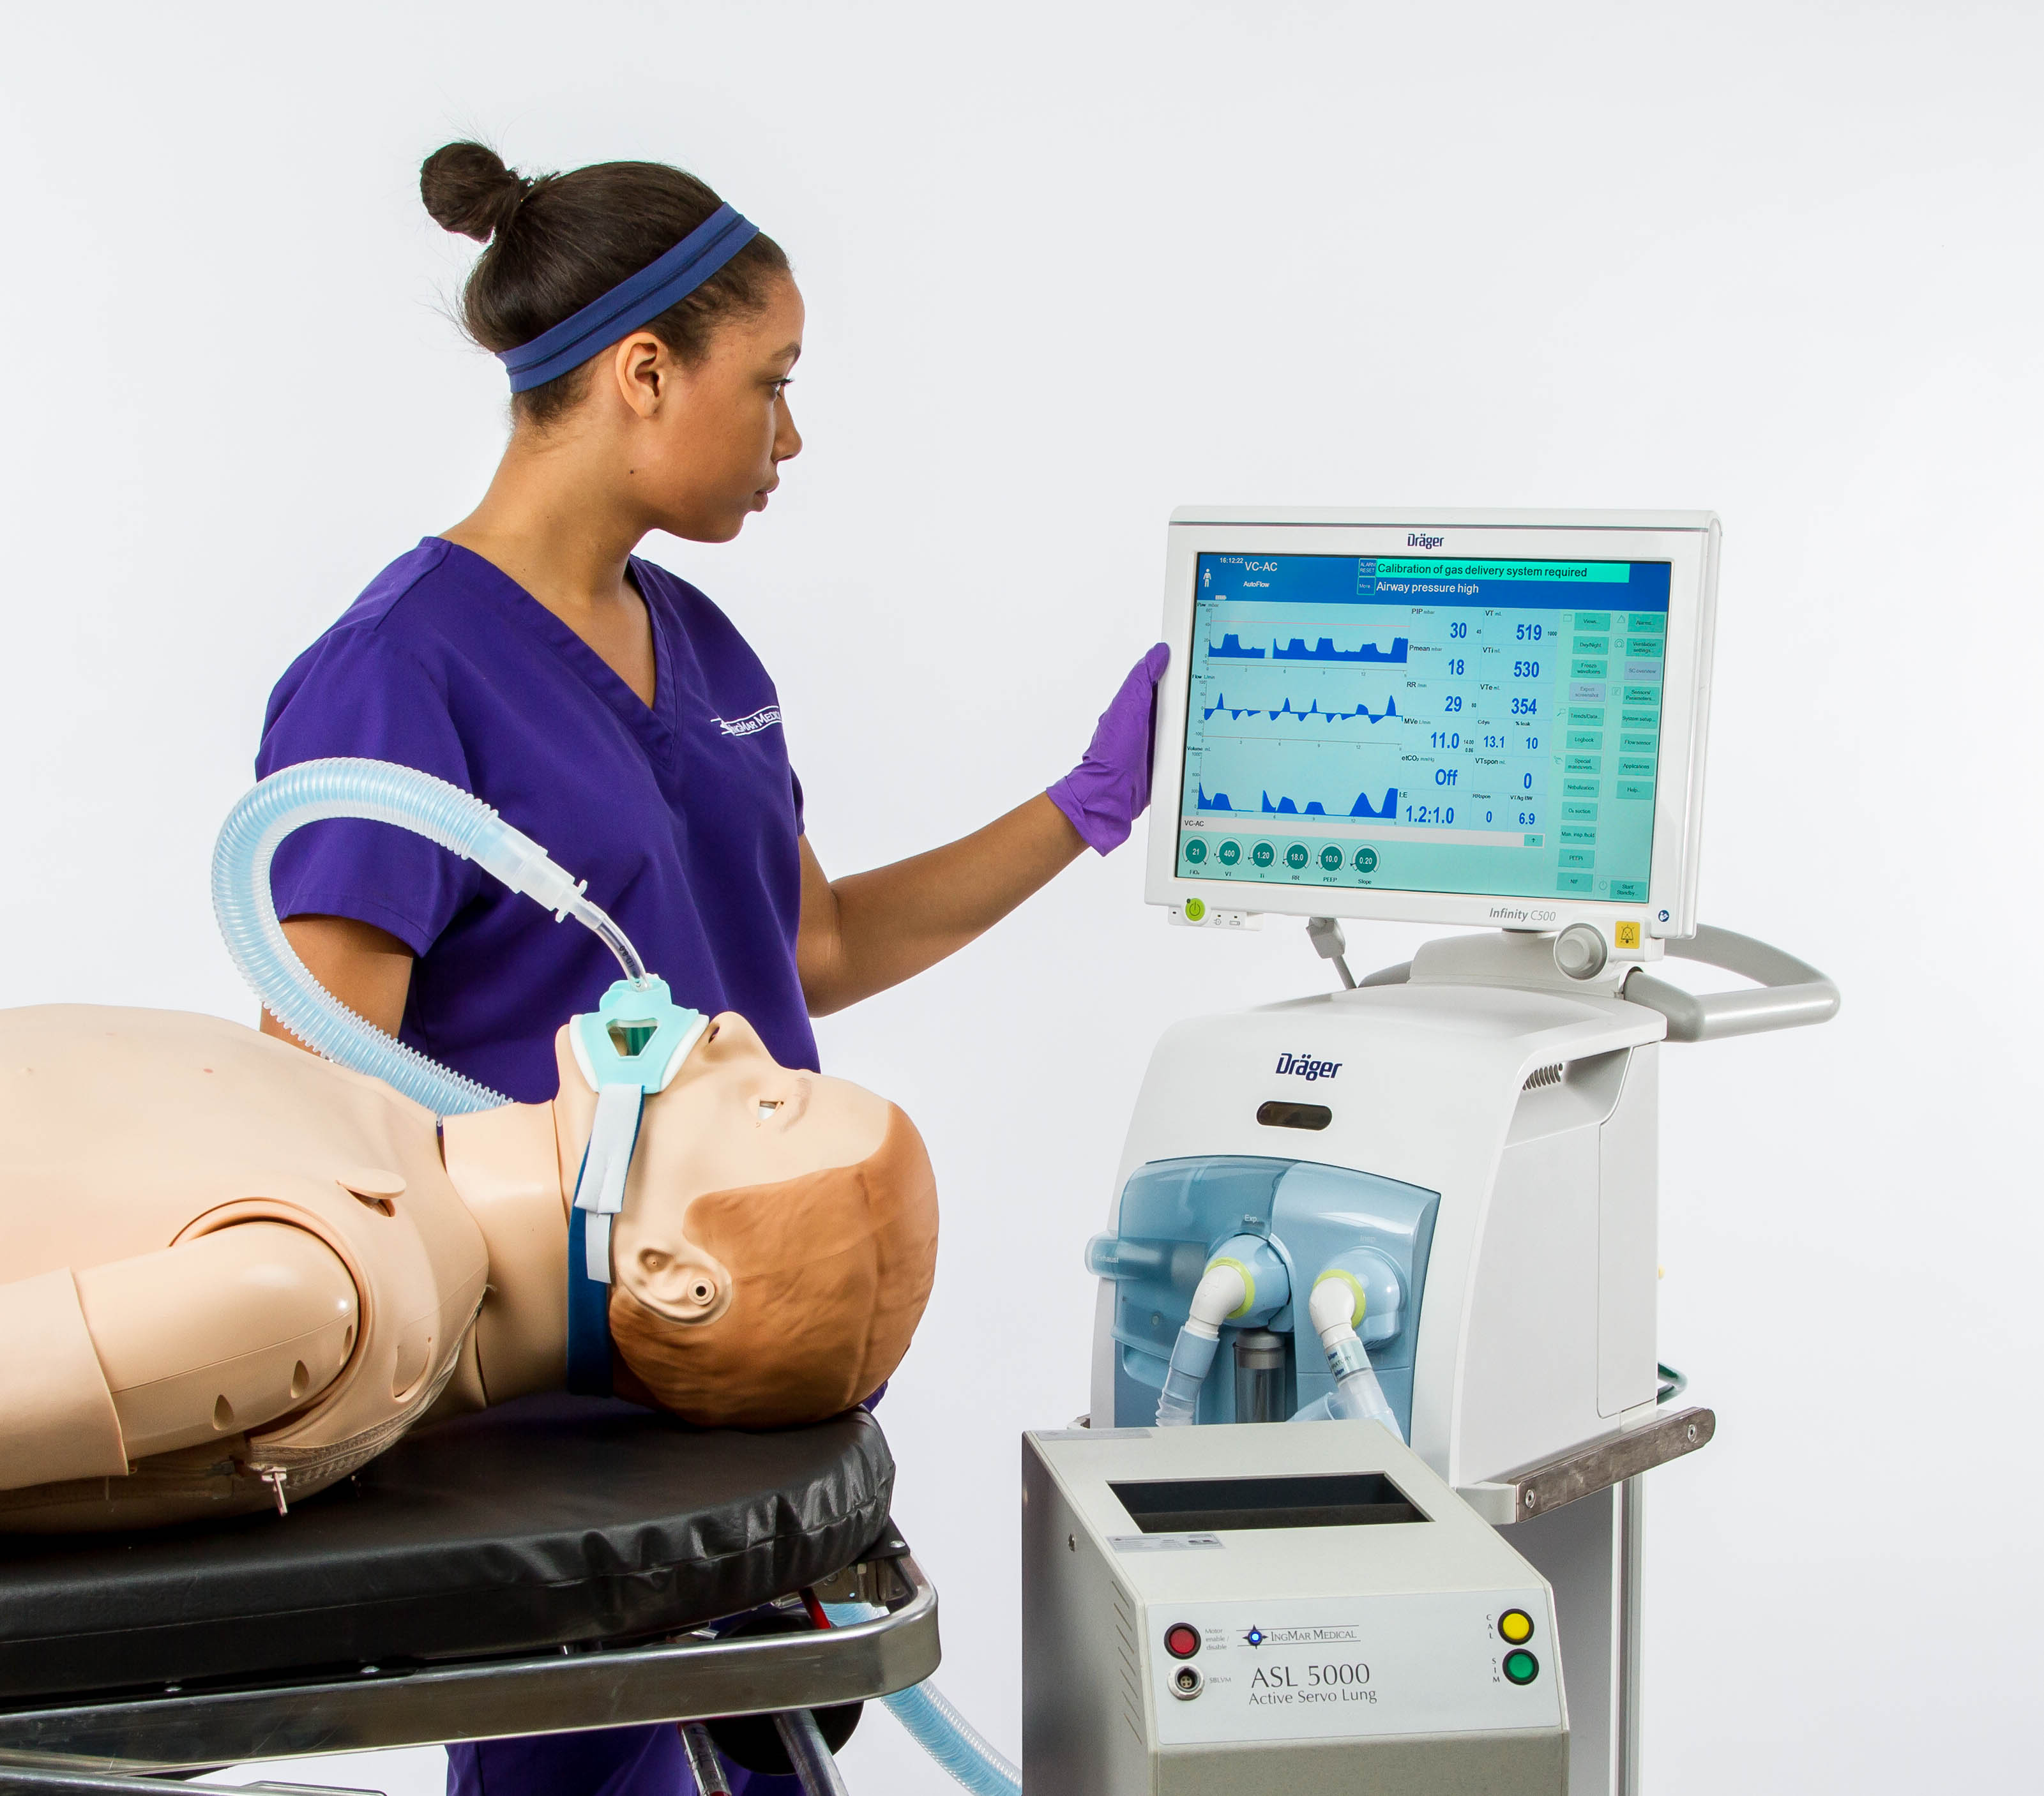 [On-Demand Webinar] How to use scenarios to simulate invasive care and the ...